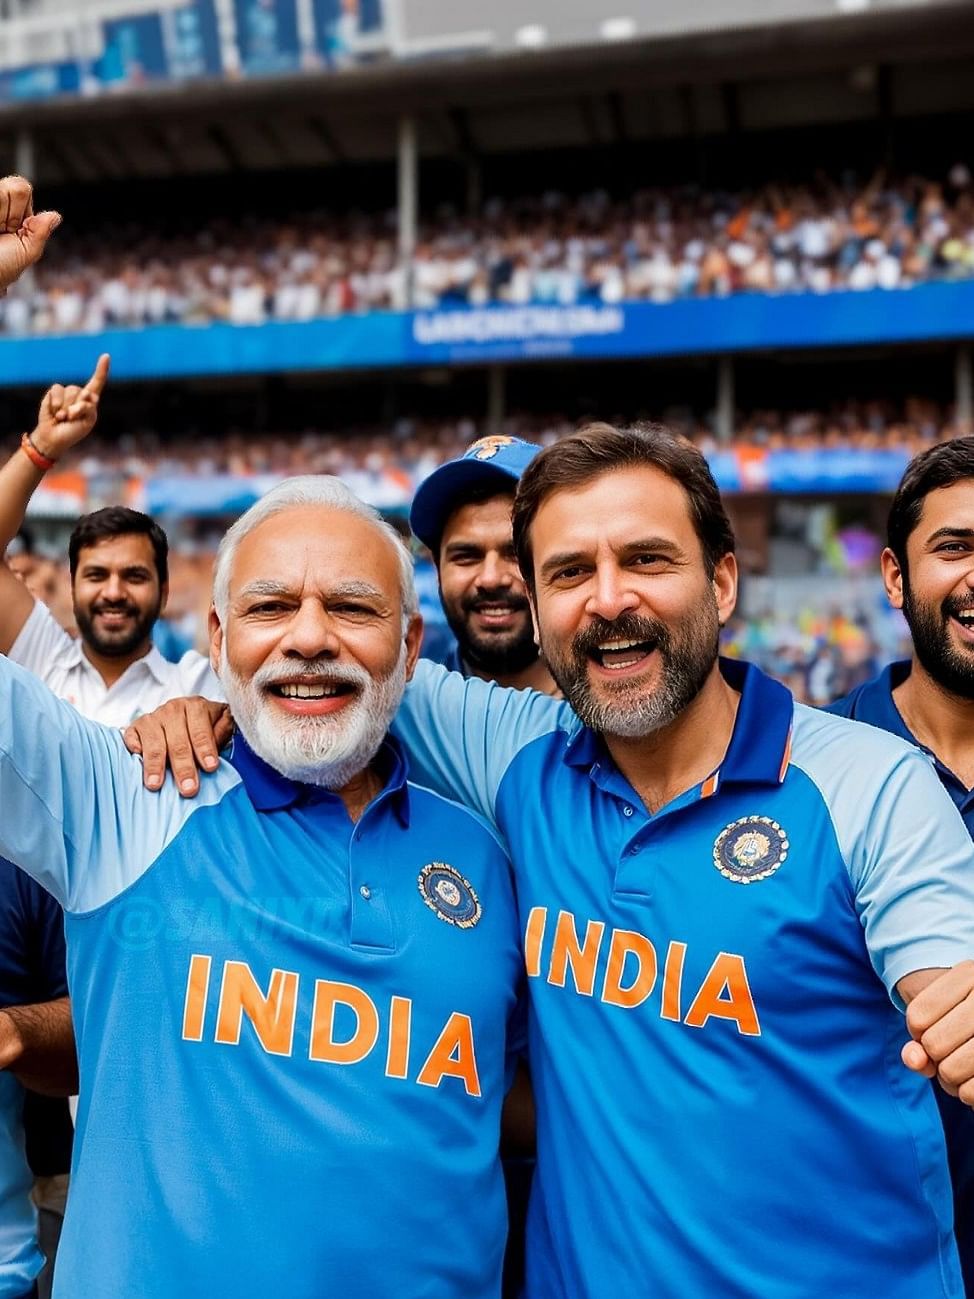 BJP leader and Prime Minister Narendra Modi and Congress leader Rahul Gandhi in blue jersey cheering for Team India.